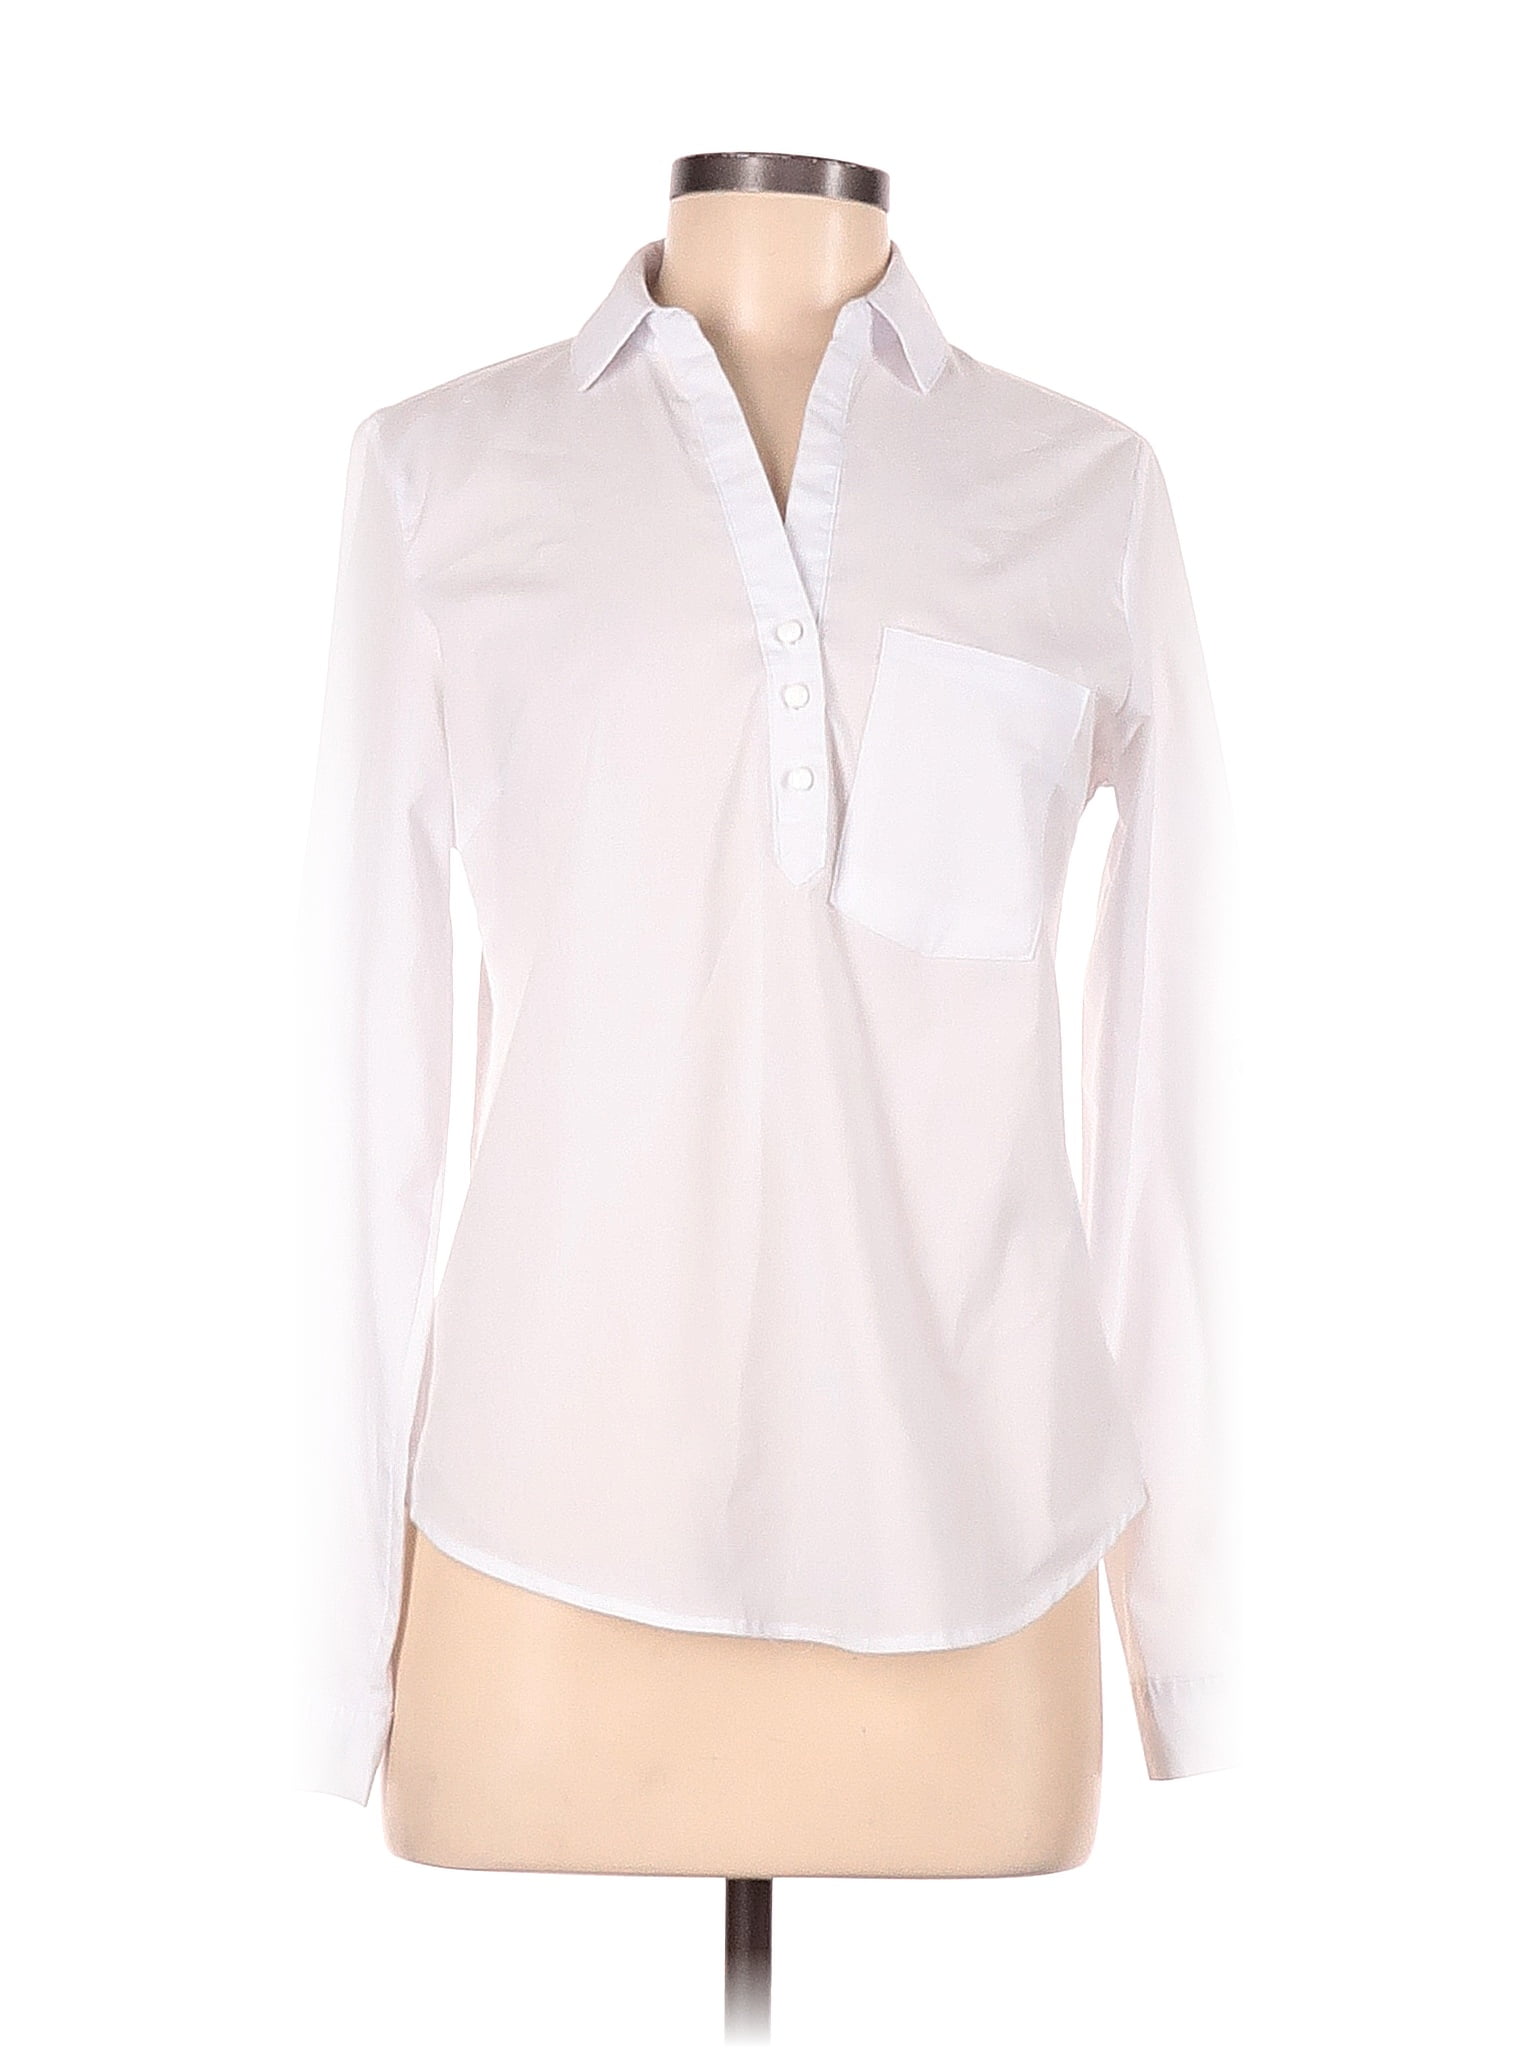 New Look Solid White Long Sleeve Blouse Size M - 50% off | thredUP